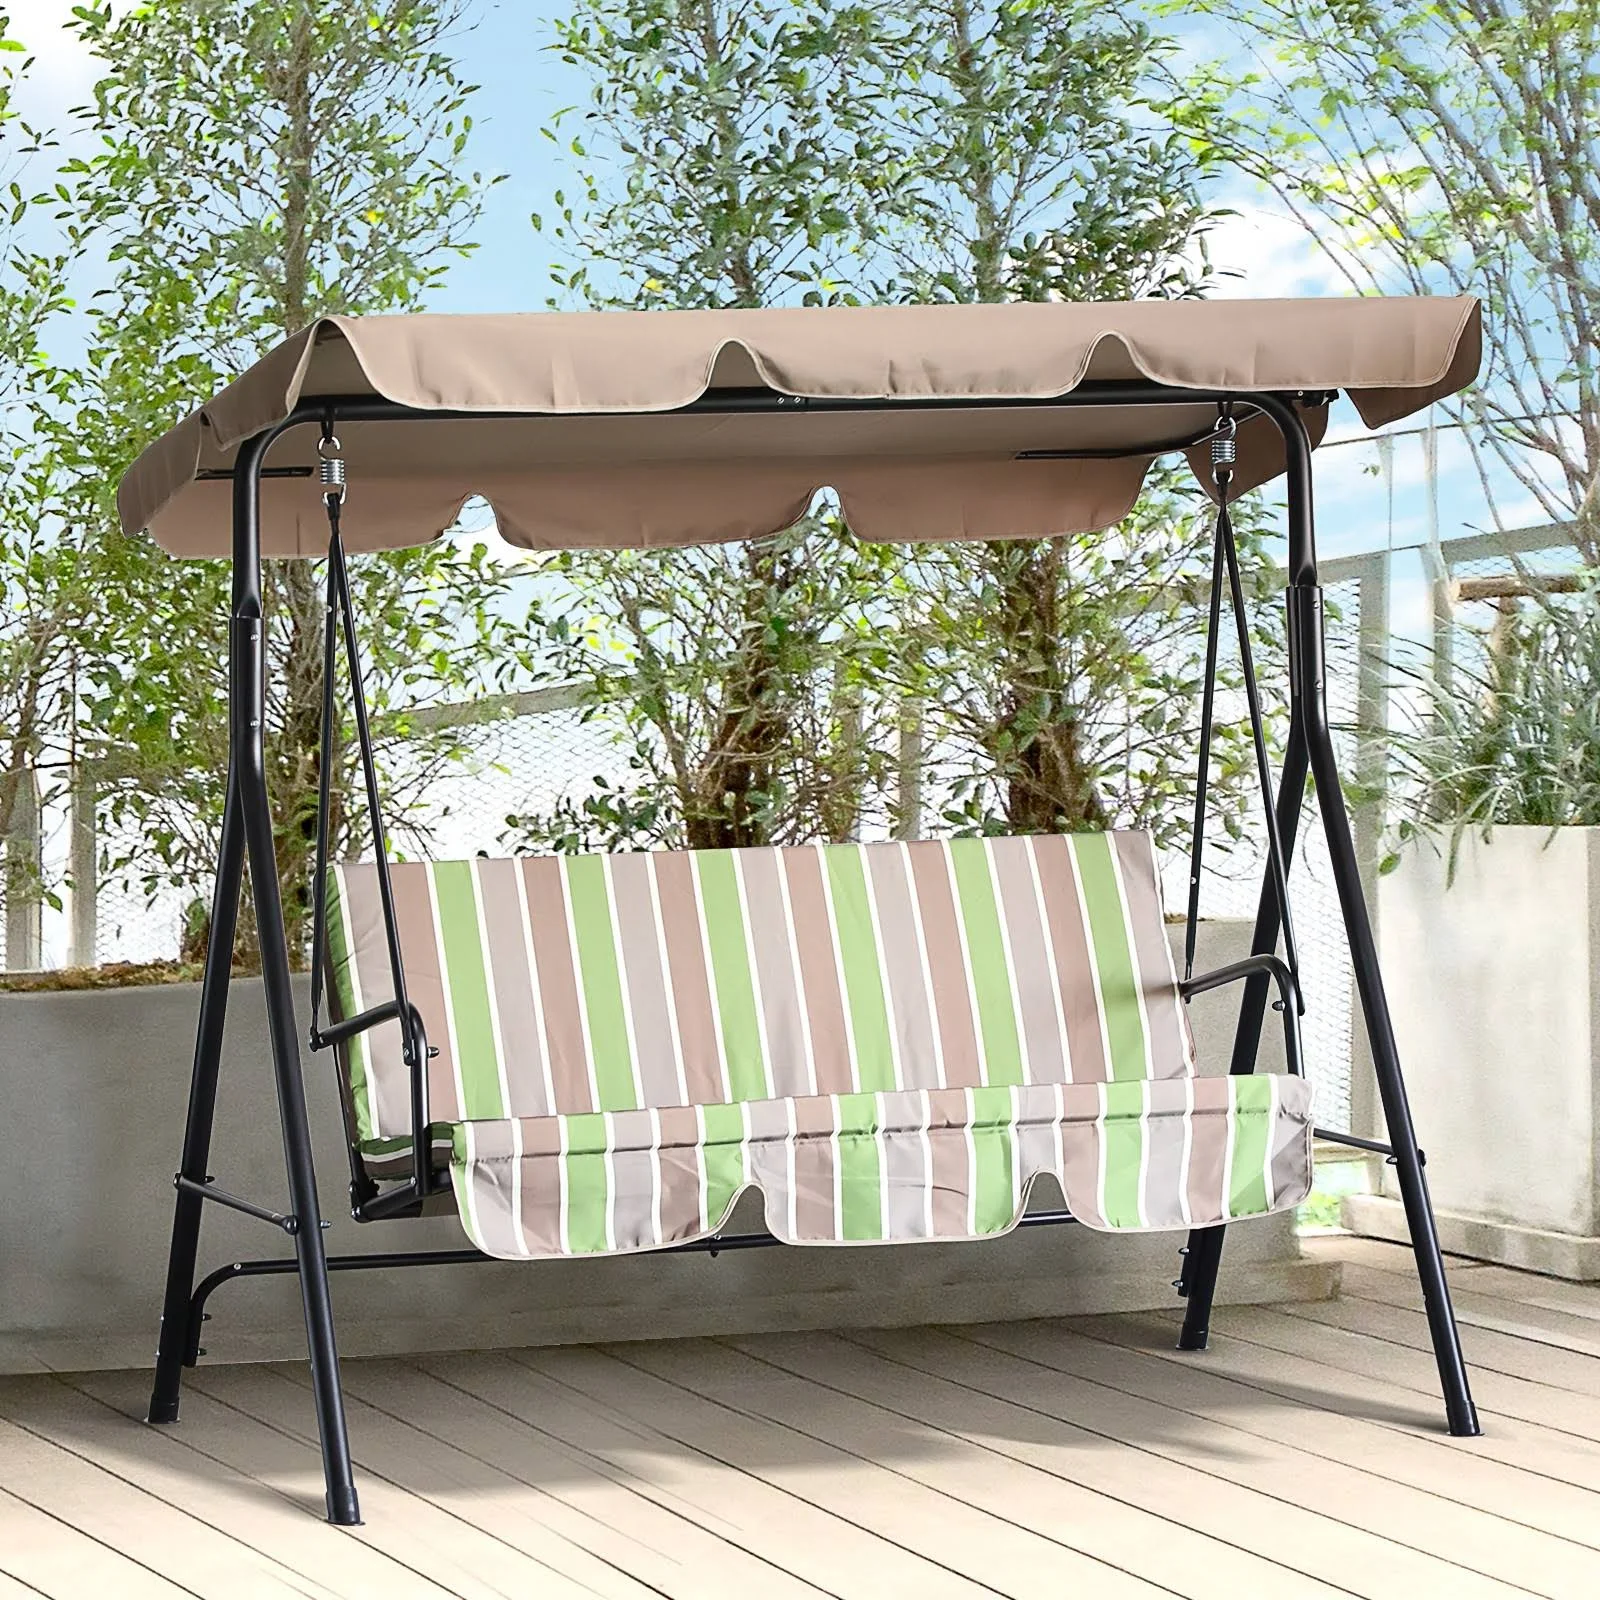 Outsunny Steel Outdoor Porch Swing Lounge Chair 3 Person with Top Canopy